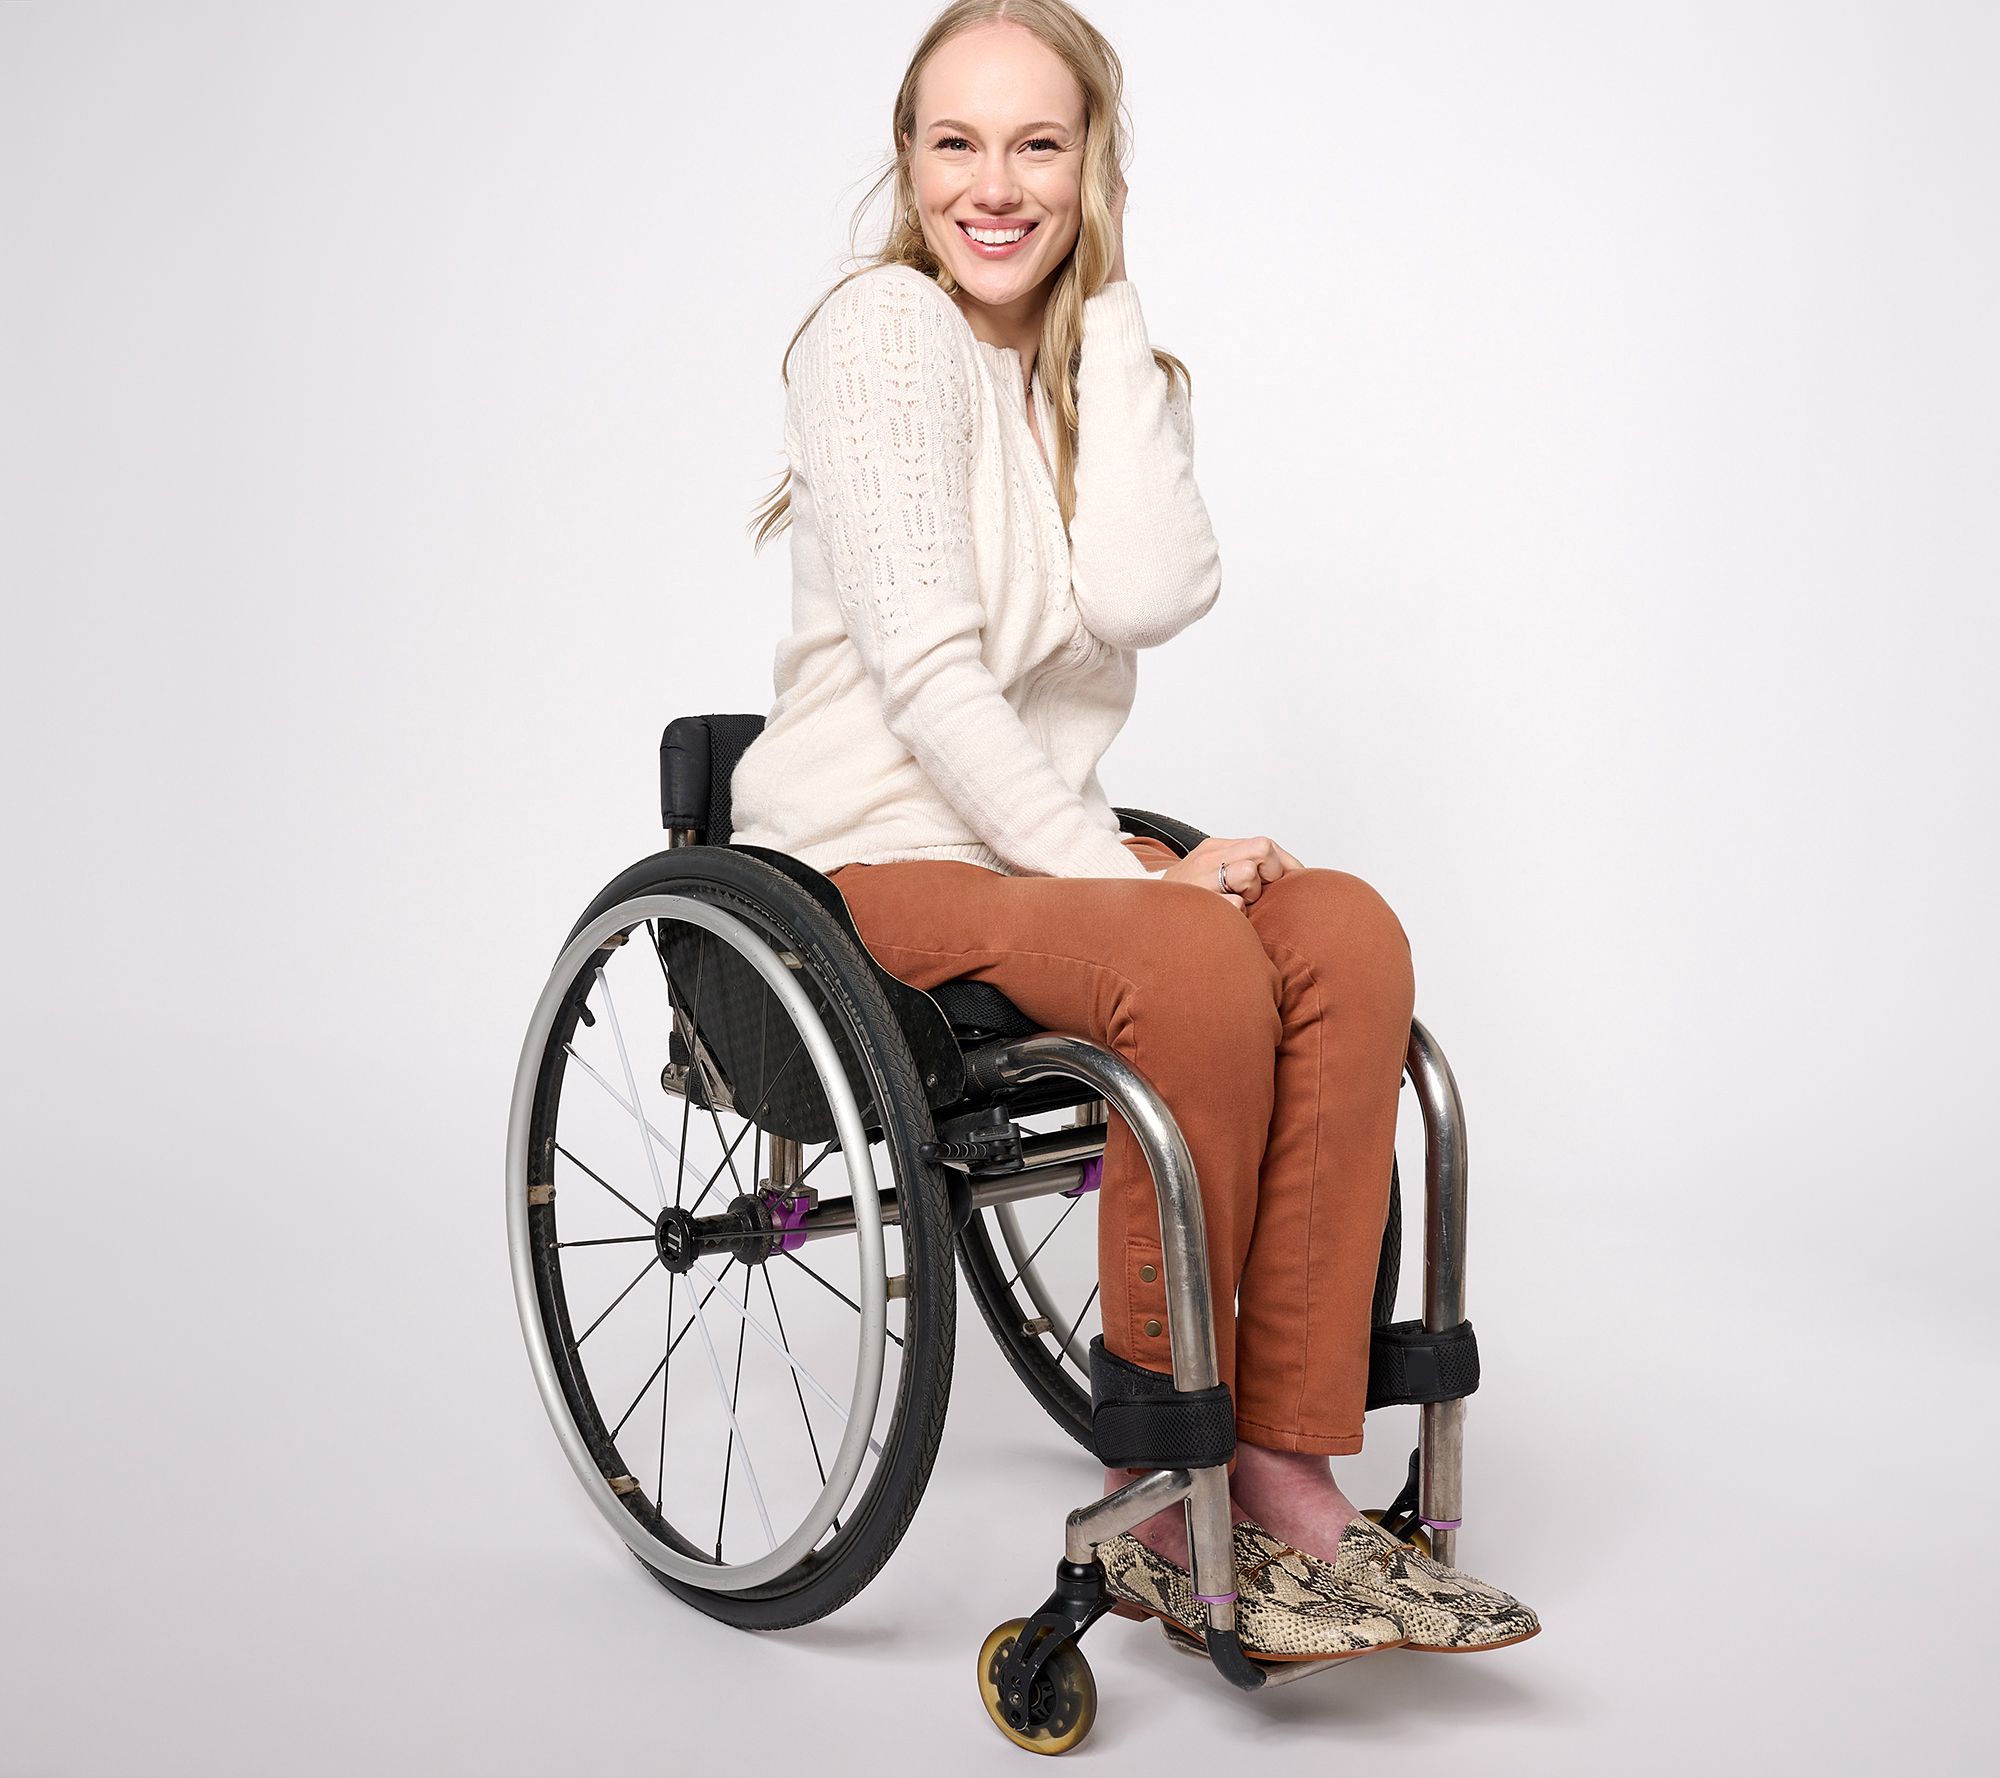 NYDJ Debuts Wheelchair-Fit Jeans on QVC's Adaptive Apparel Storefront